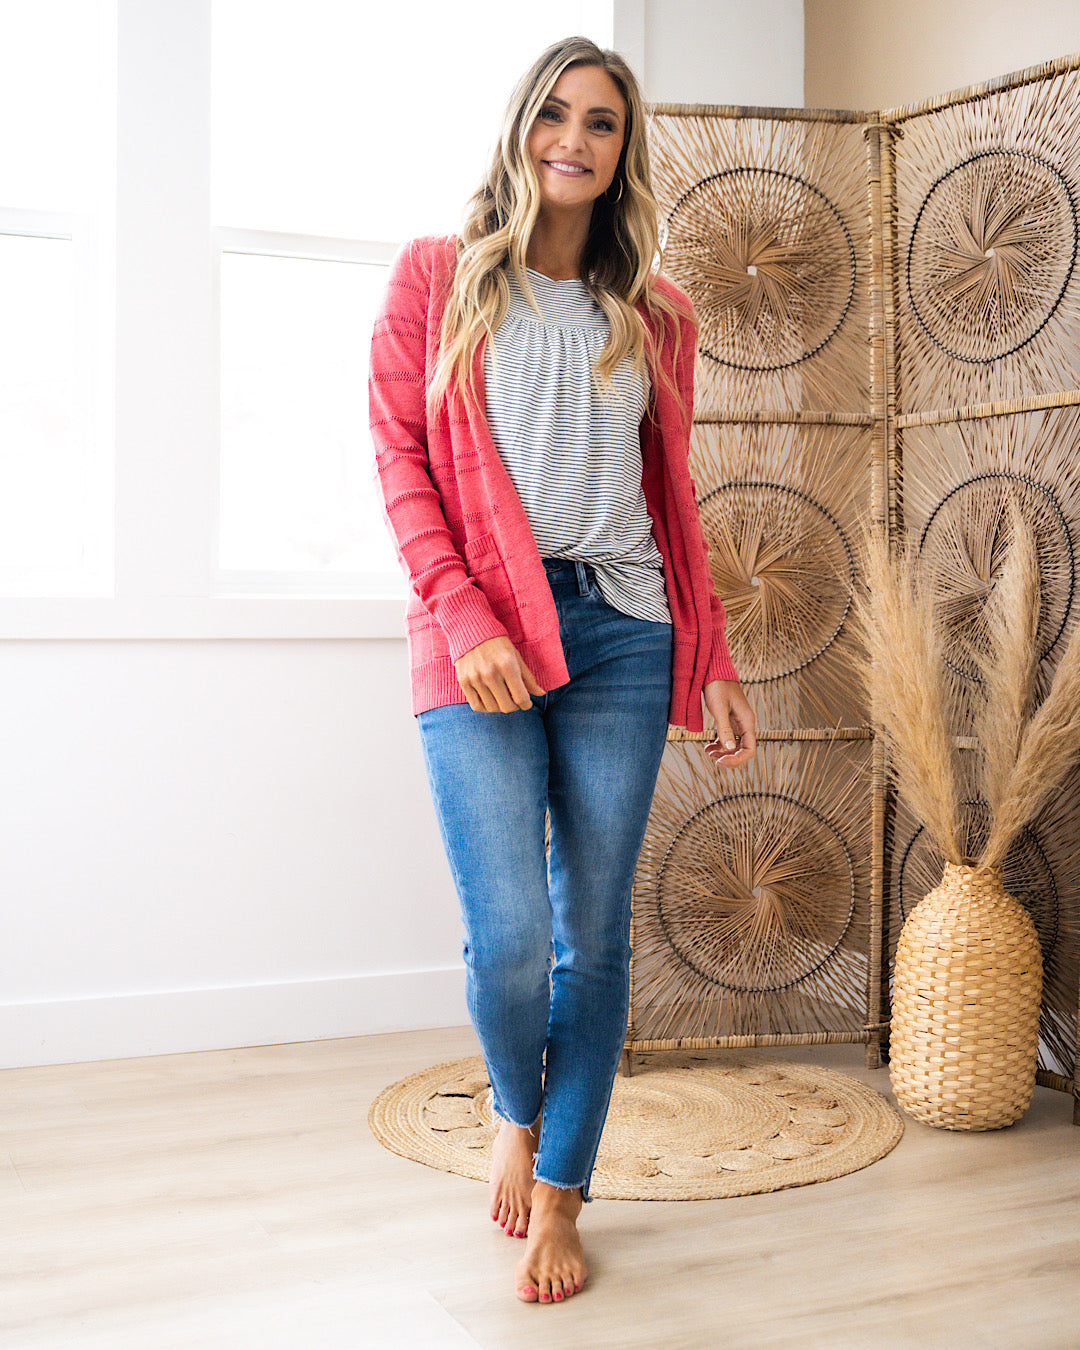 NEW! Pointelle Striped Cardigan - Rose  Staccato   